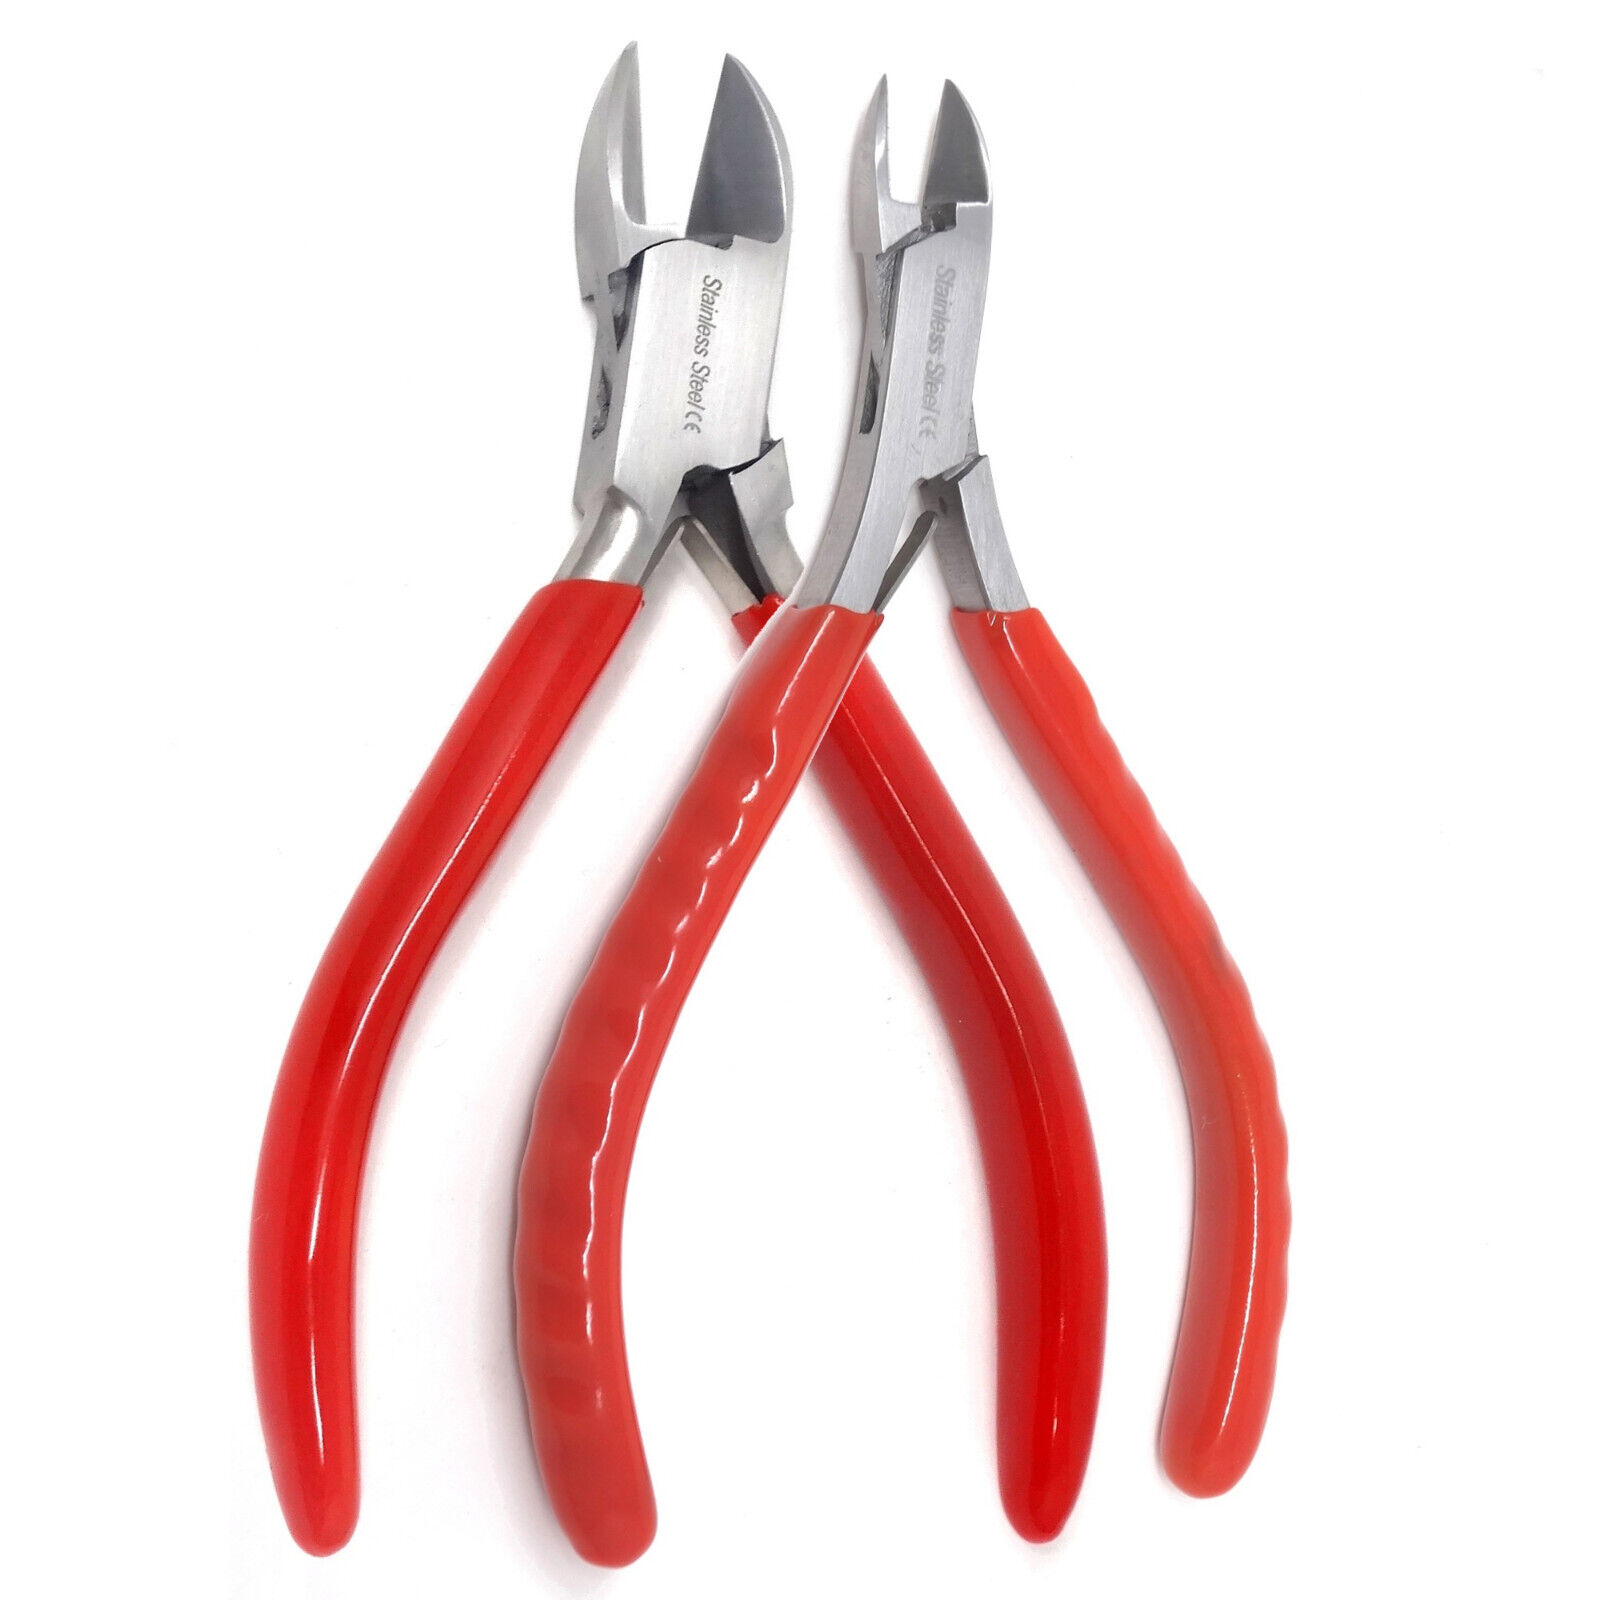 10pcs JEWELERS PLIERS SET JEWELRY MAKING BEADING WIRE WRAPPING HOBBY 5" PLIER US A2Z SCILAB Does Not Apply - фотография #6